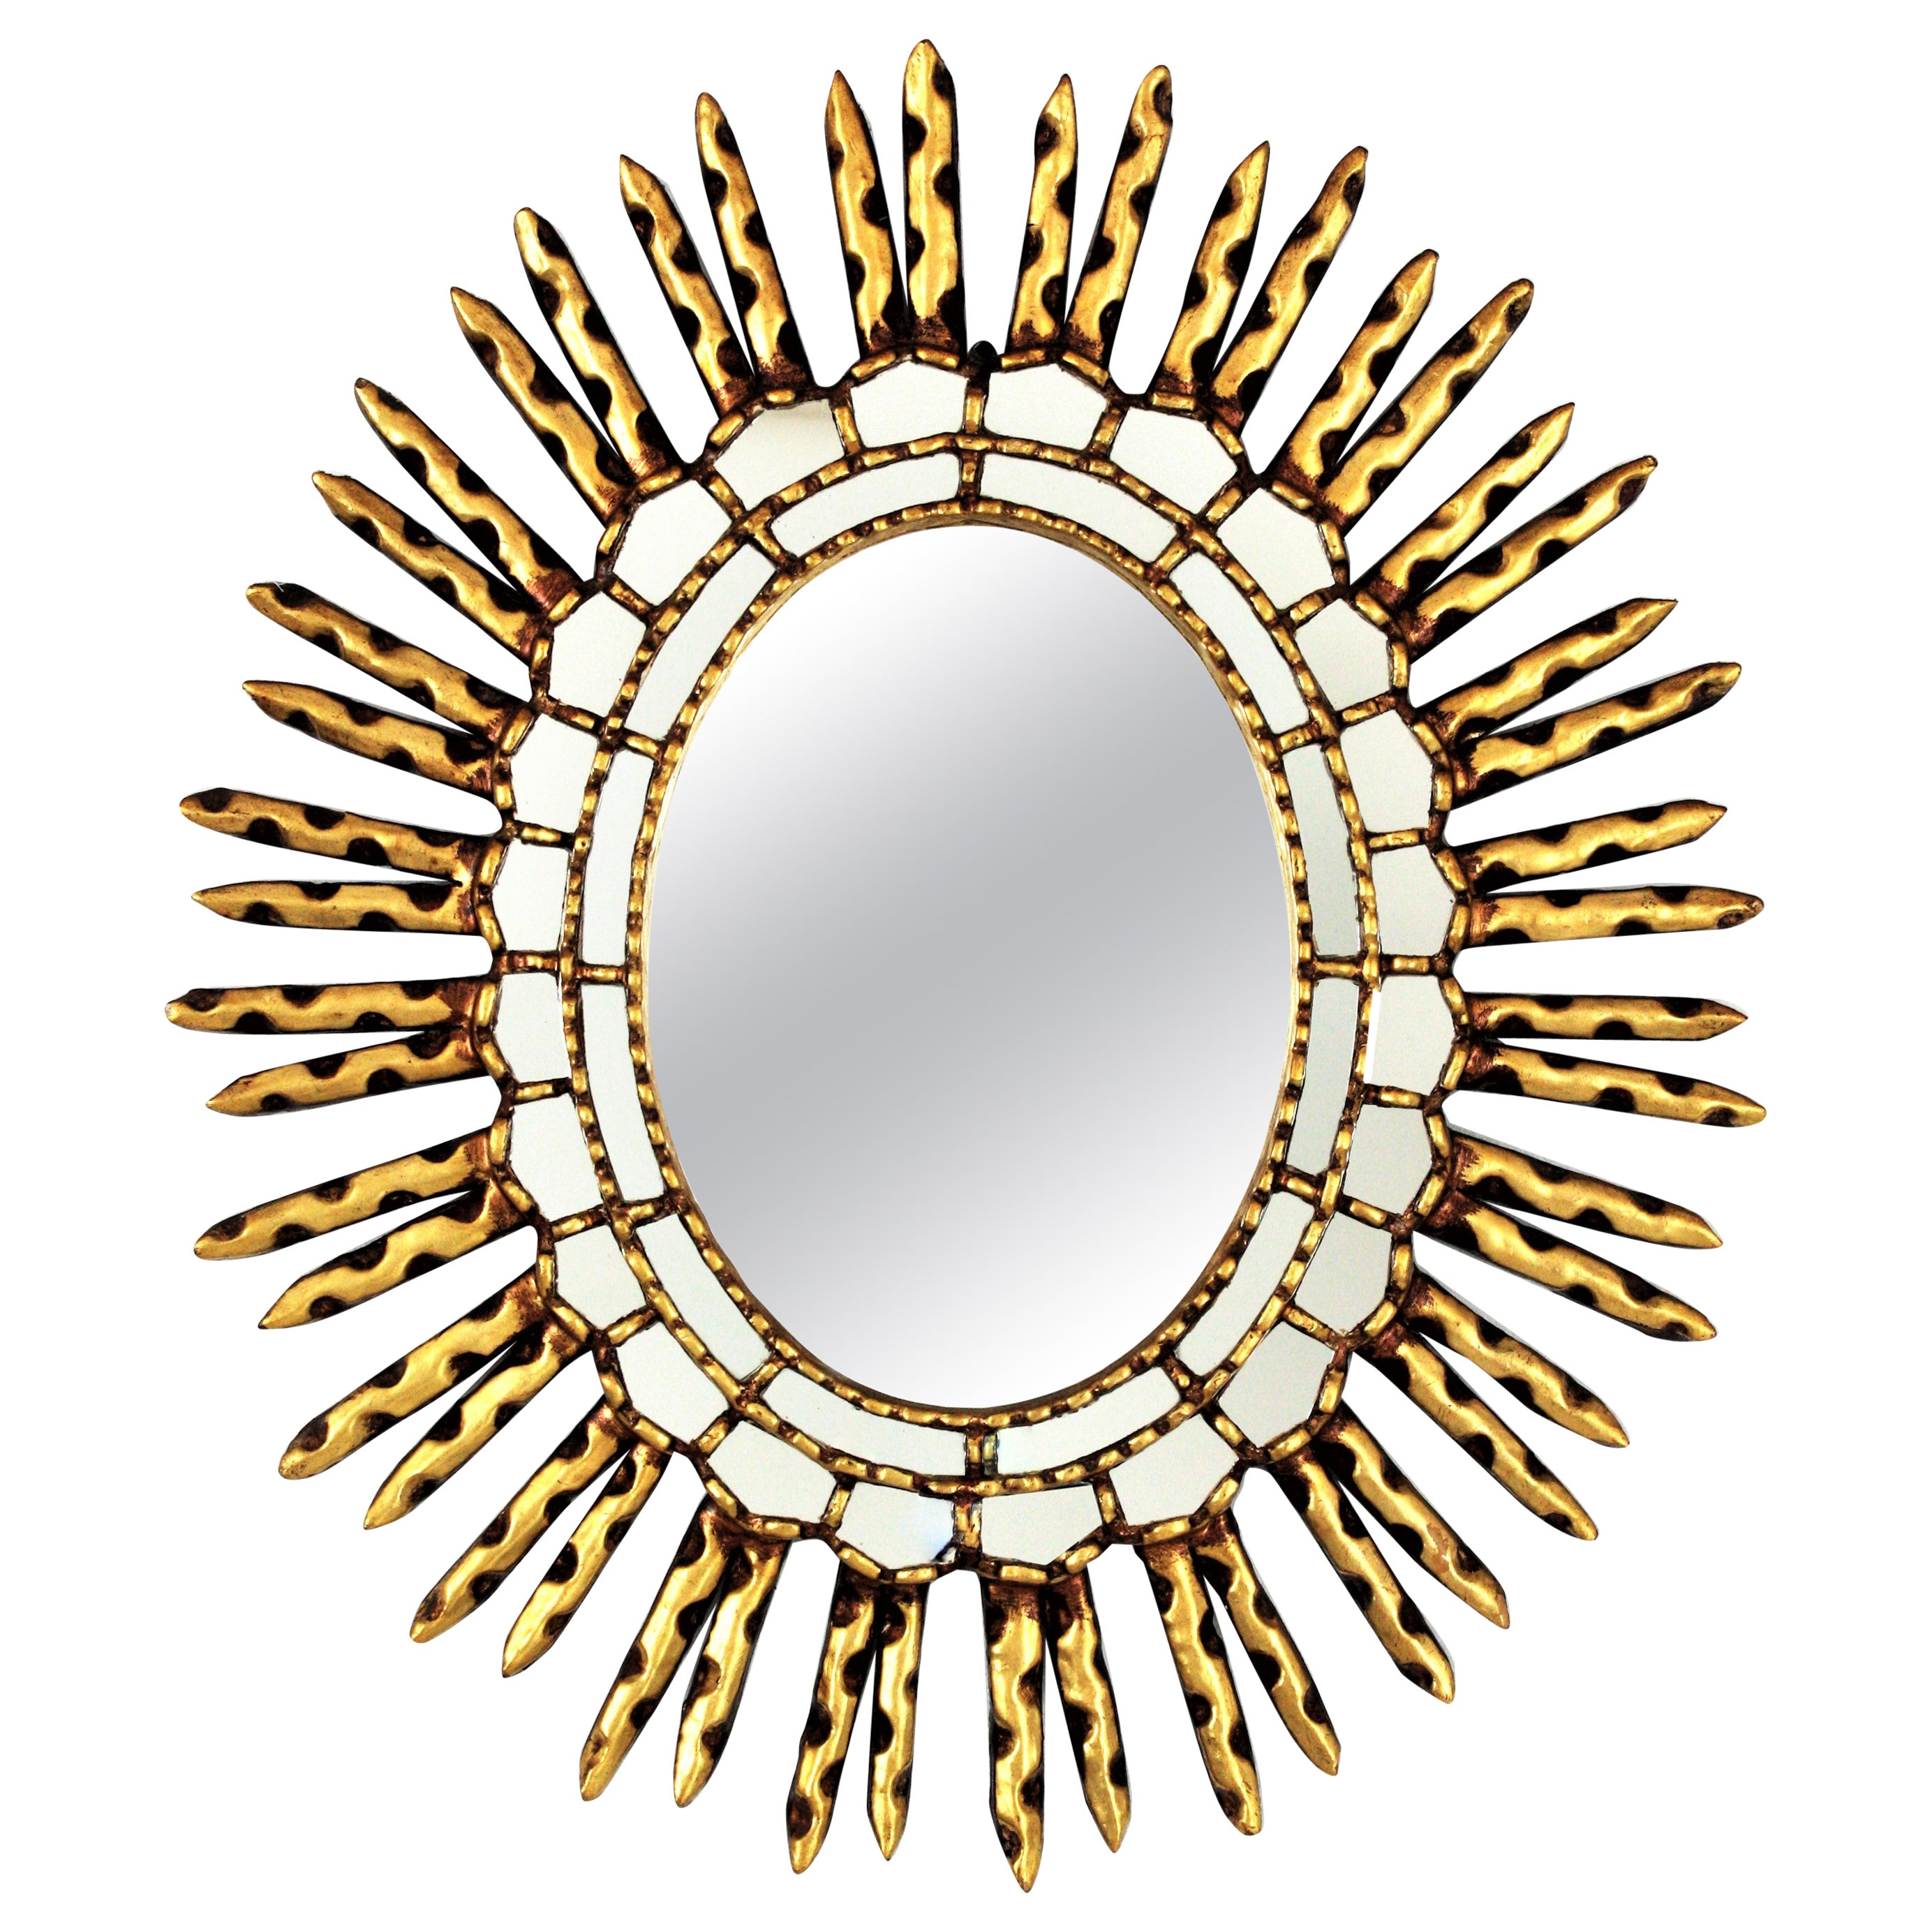 Spanish Colonial Sunburst Oval Mirror in Giltwood For Sale